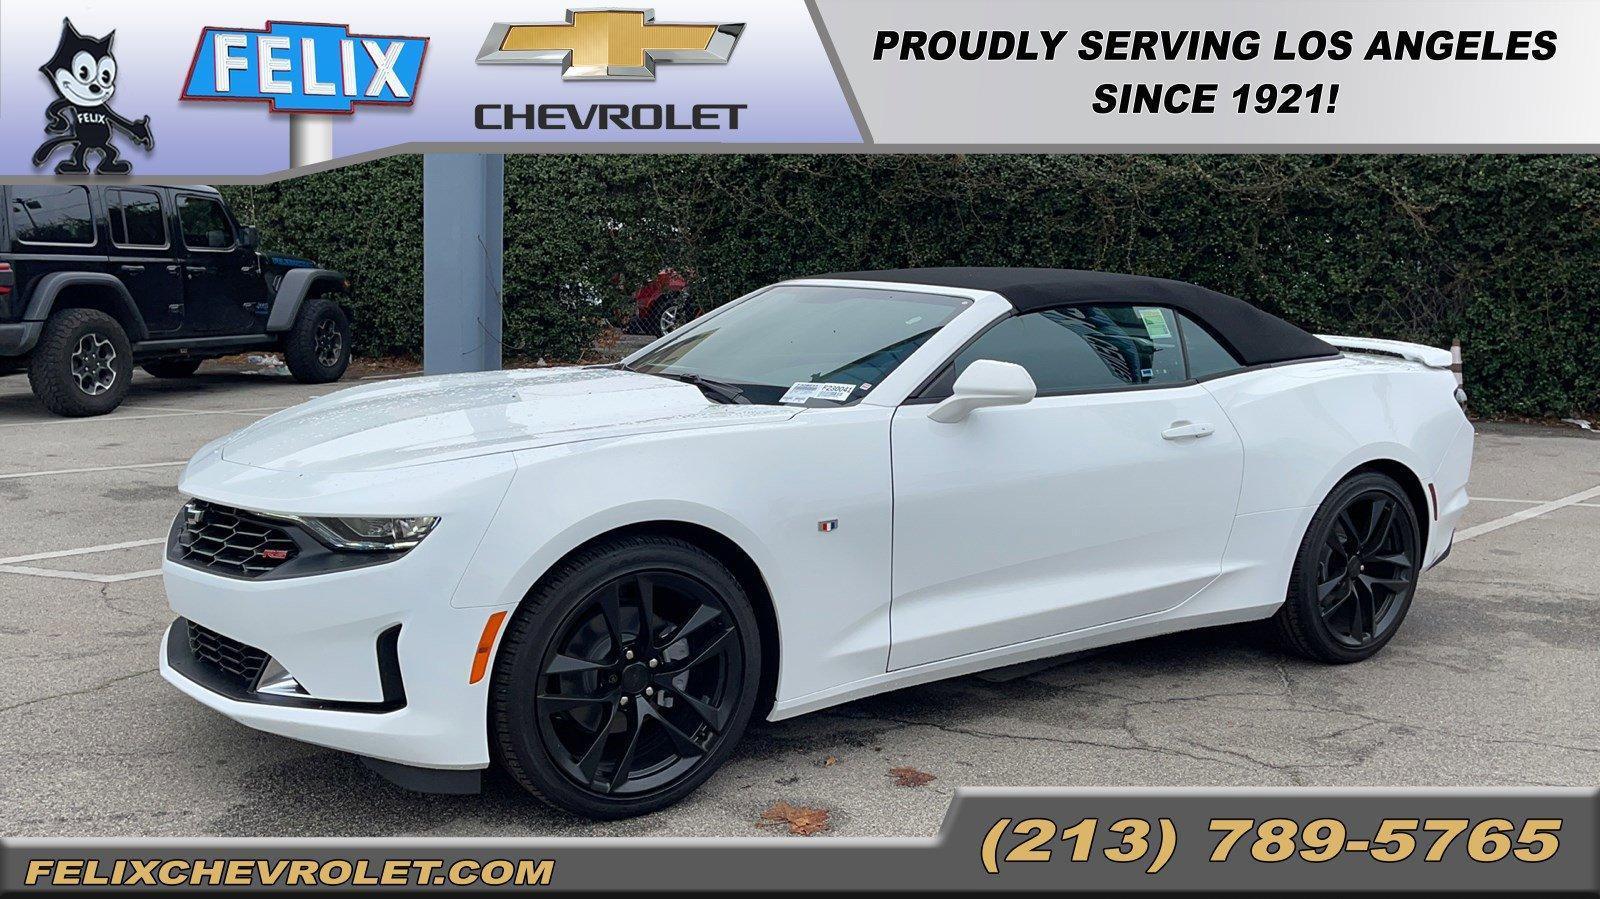 Los Angeles White Chevrolet Camaro New Car For Sale